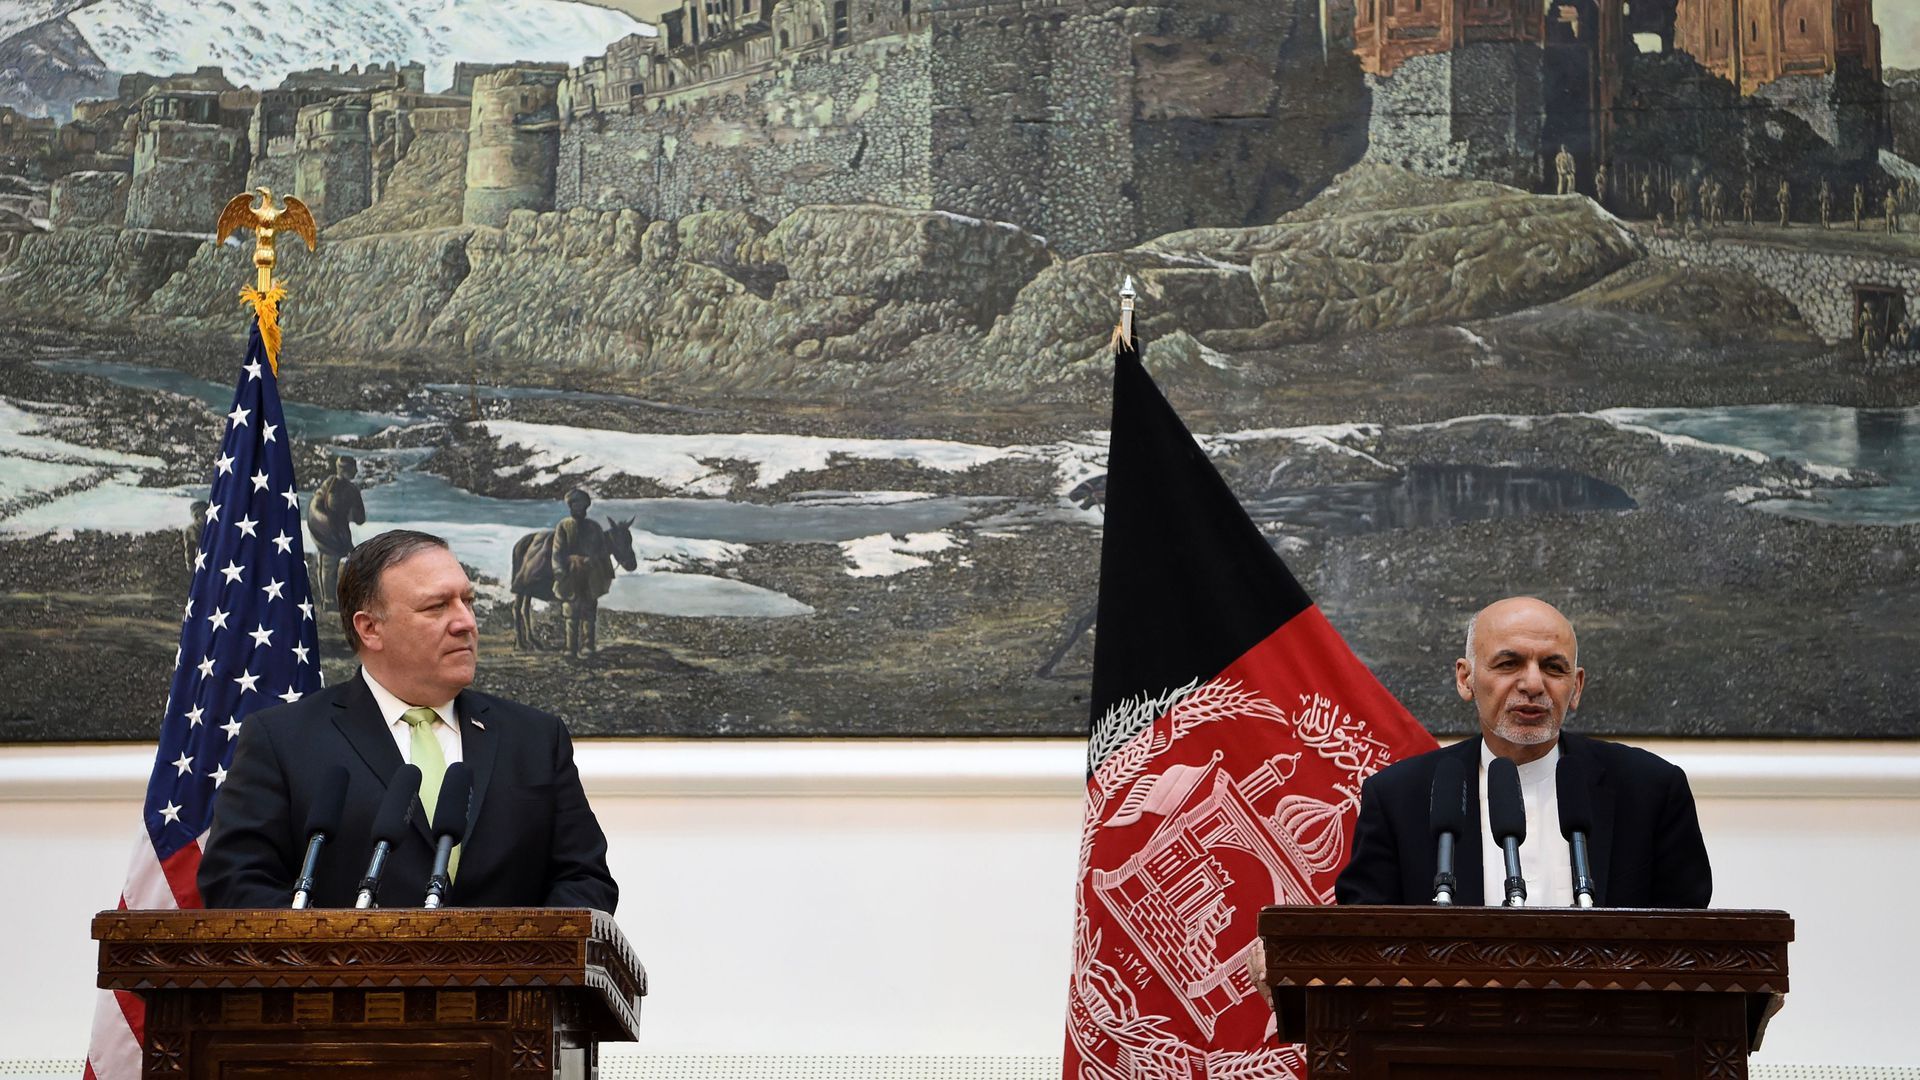 Afghan President Ashraf Ghani with Secretary of State Mike Pompeo